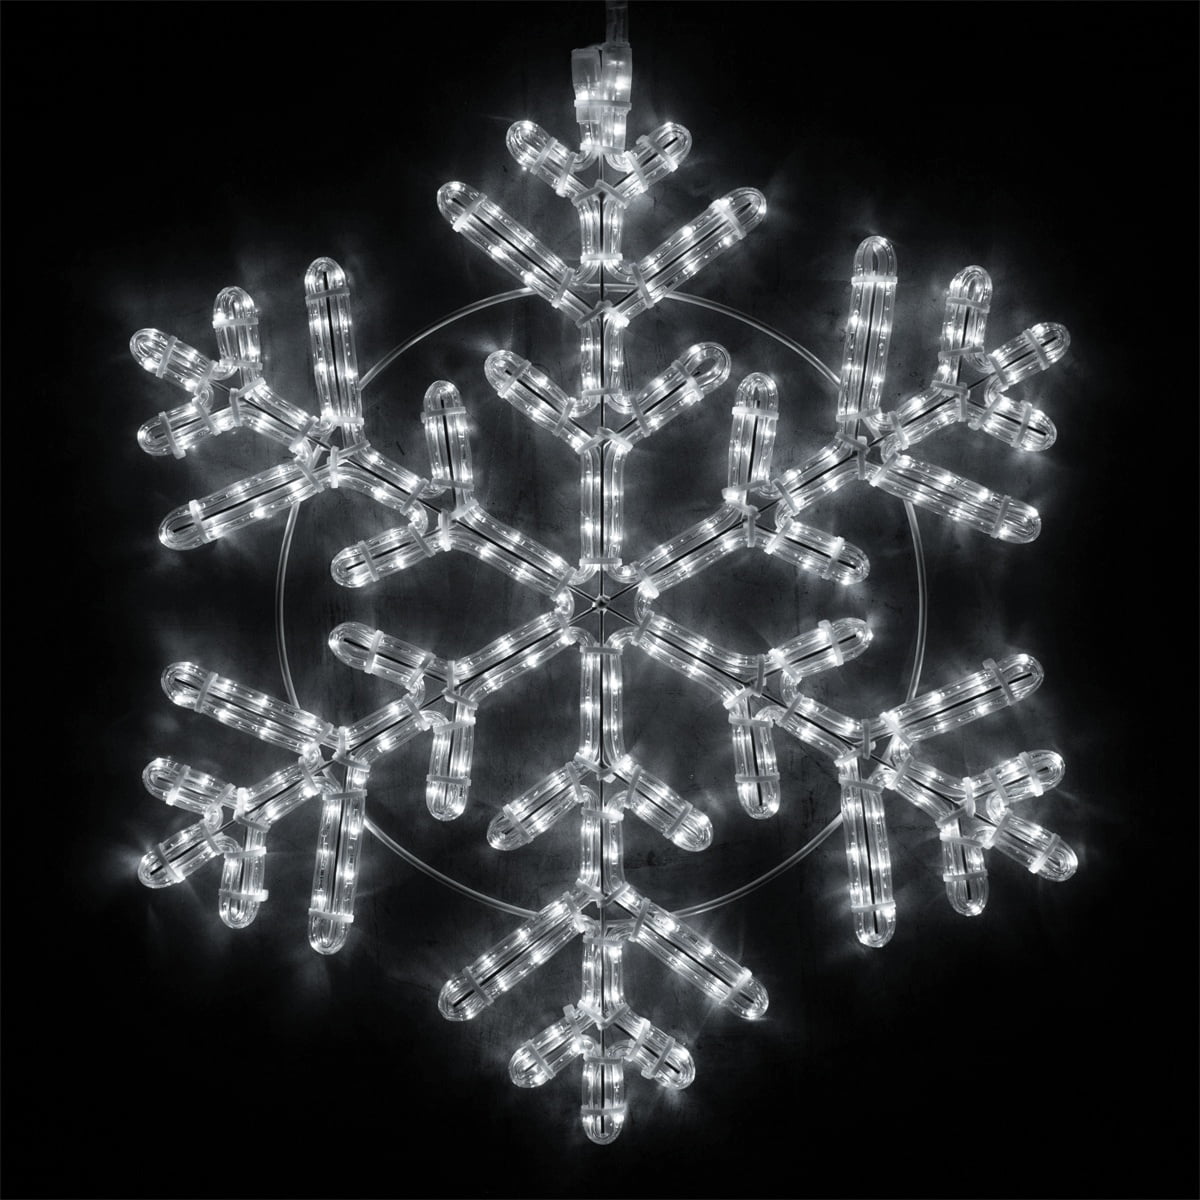 Details about   50 LED String Fairy Lights DC 12V Xmas Garden Home Party Decor Lamp Waterproof 